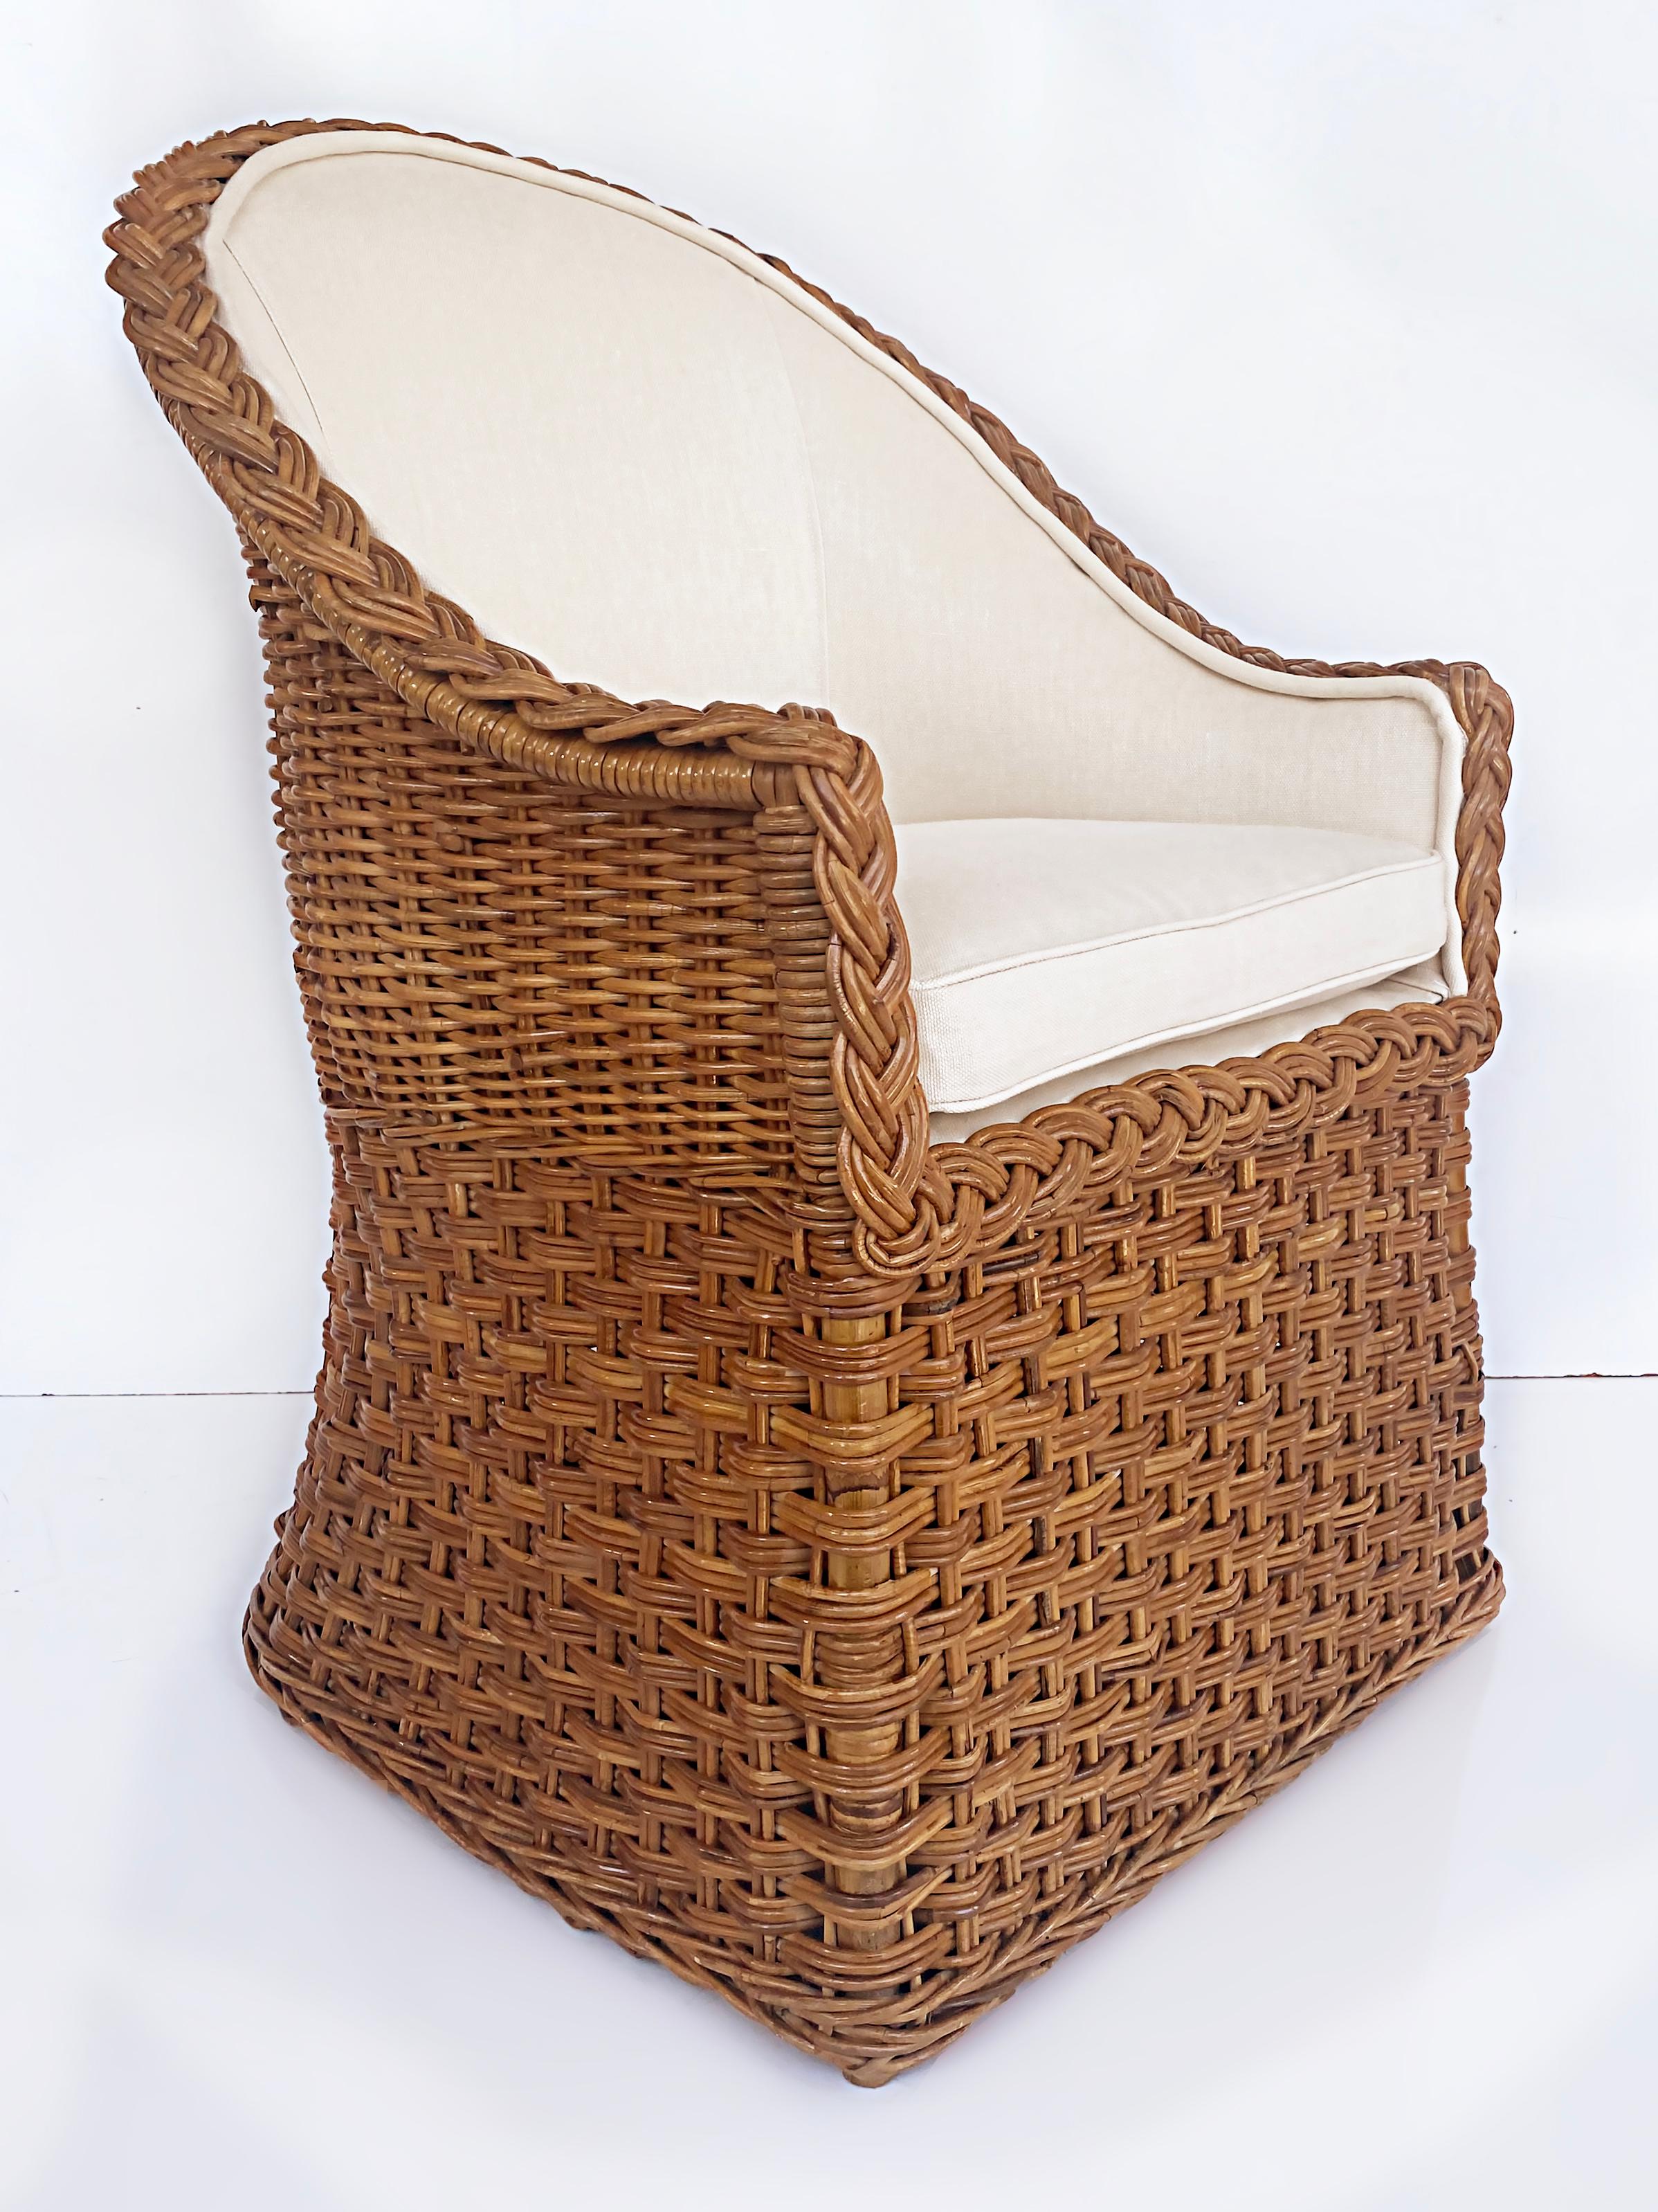 Organic Modern Wicker Works Braided Rattan Club Chairs, New Upholstery, 1 Pair Available For Sale